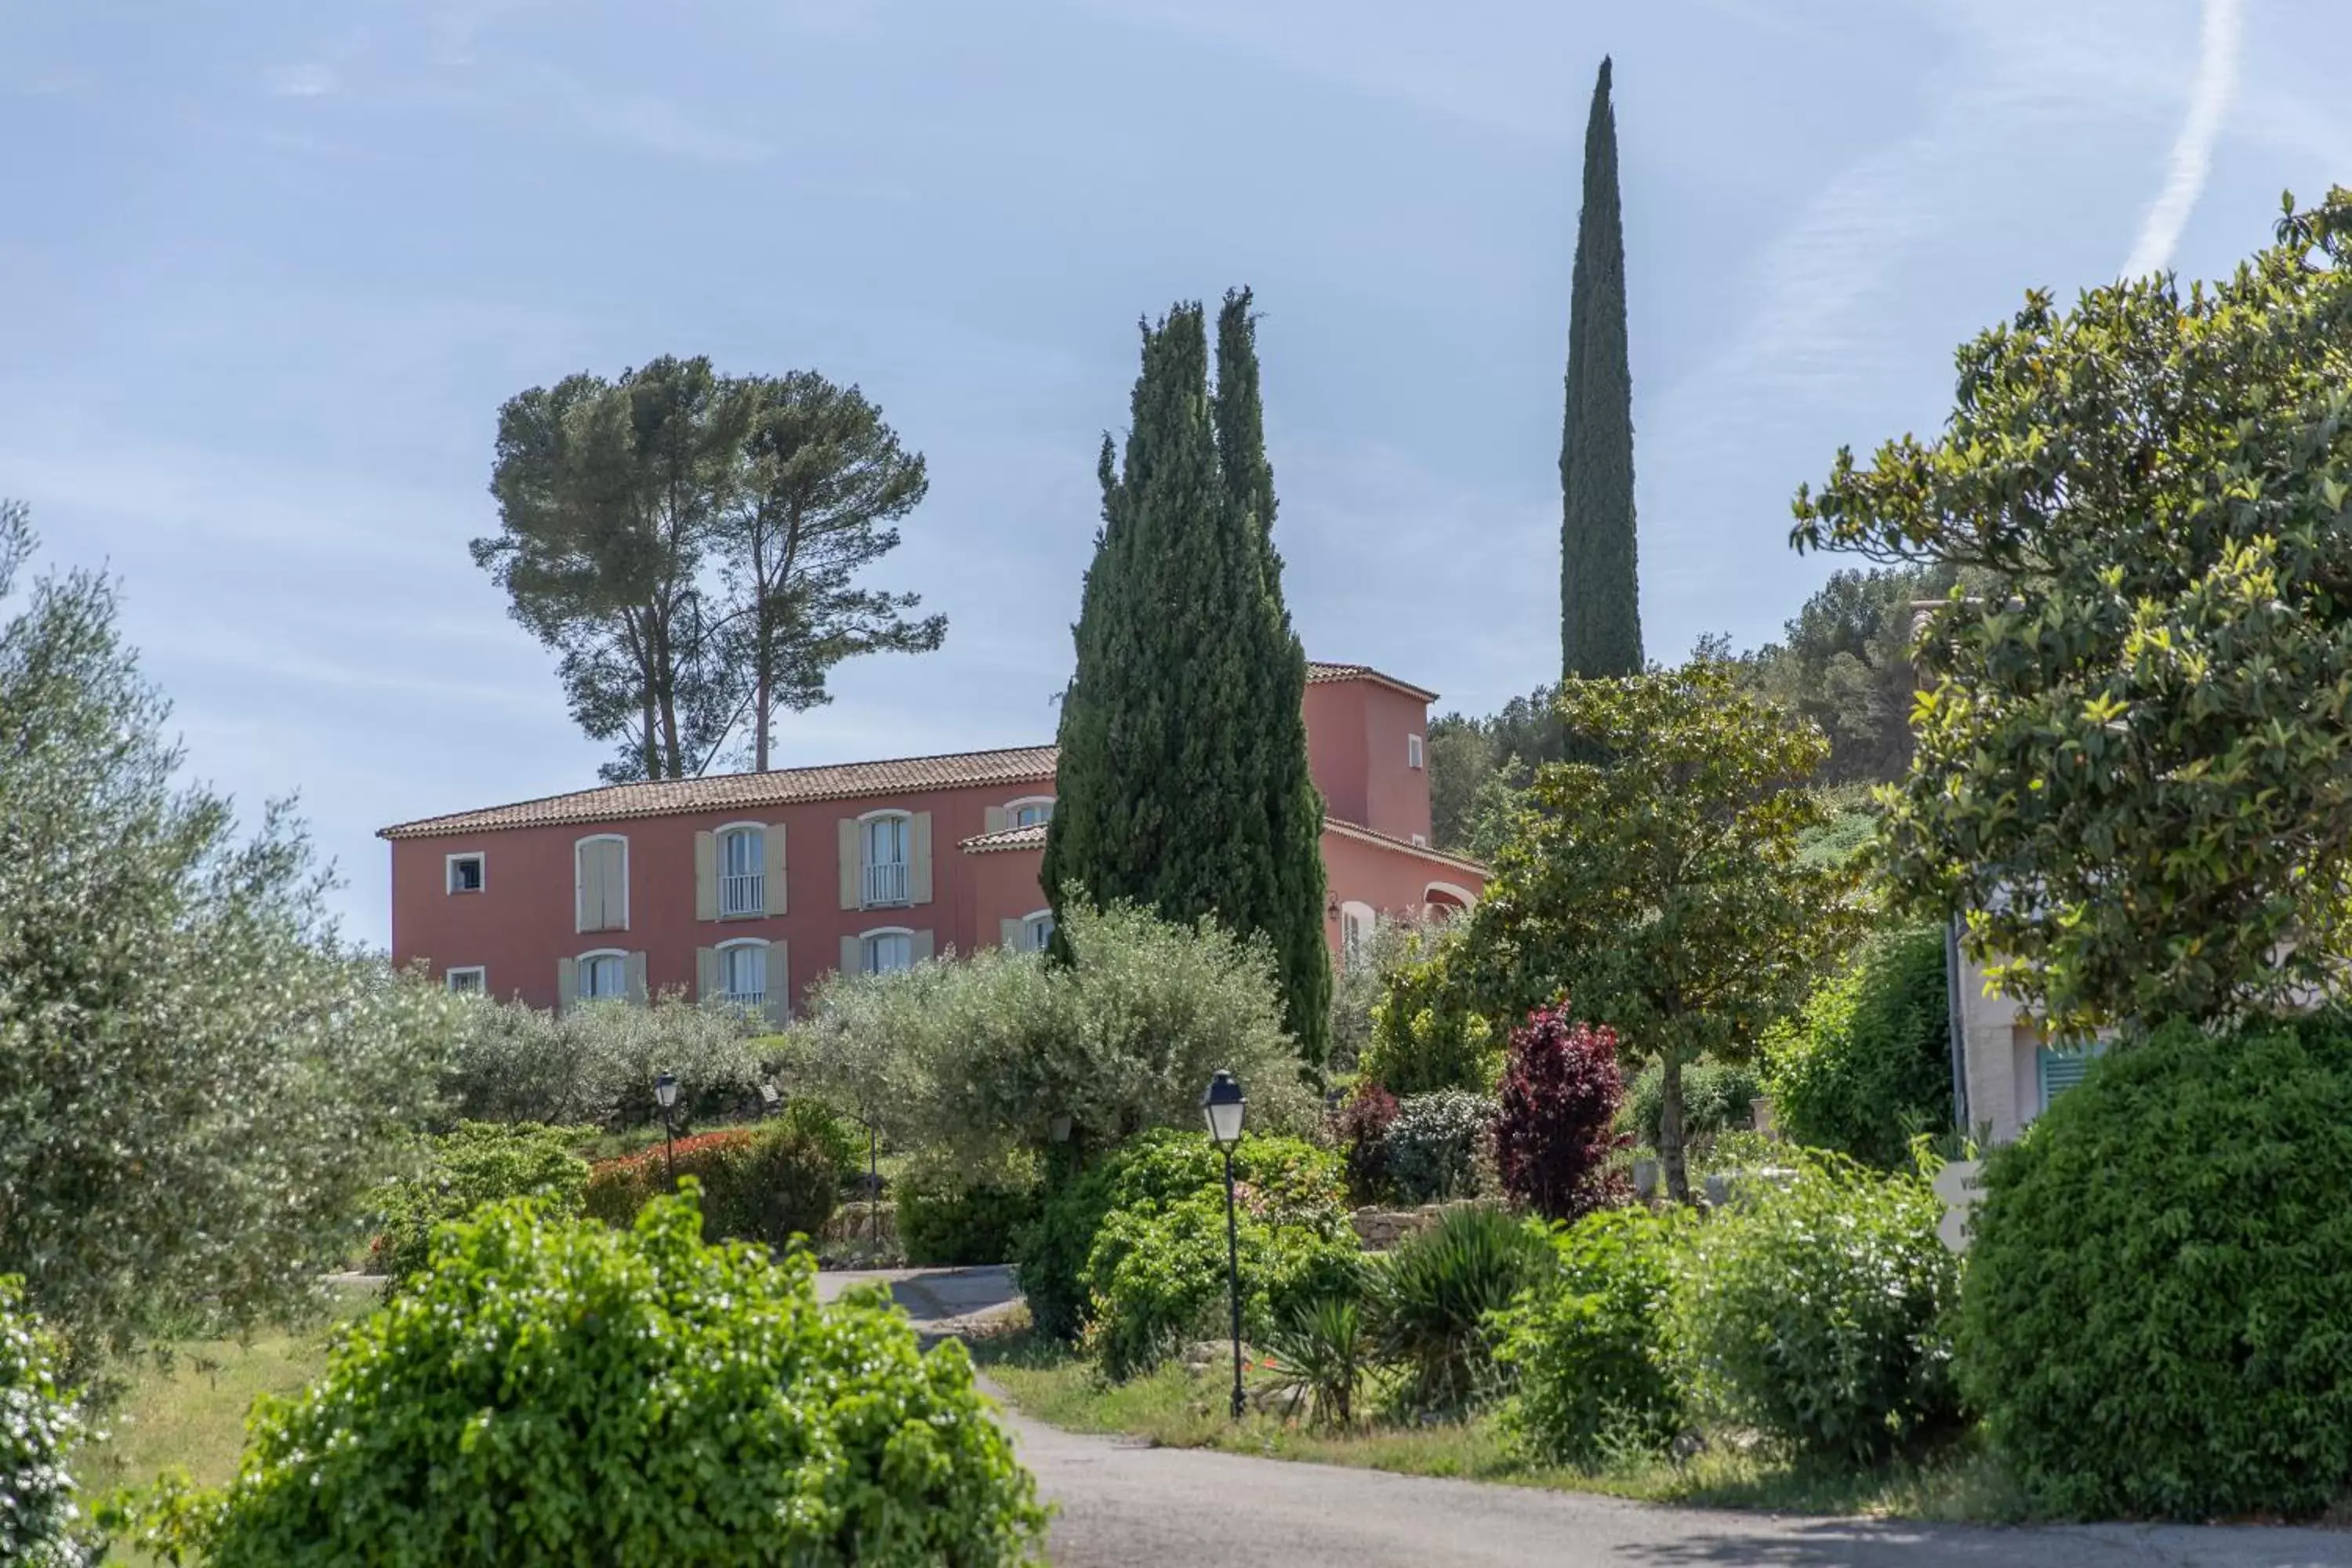 Property Building in Domaine Rabiega - Vineyard and Boutique hotel